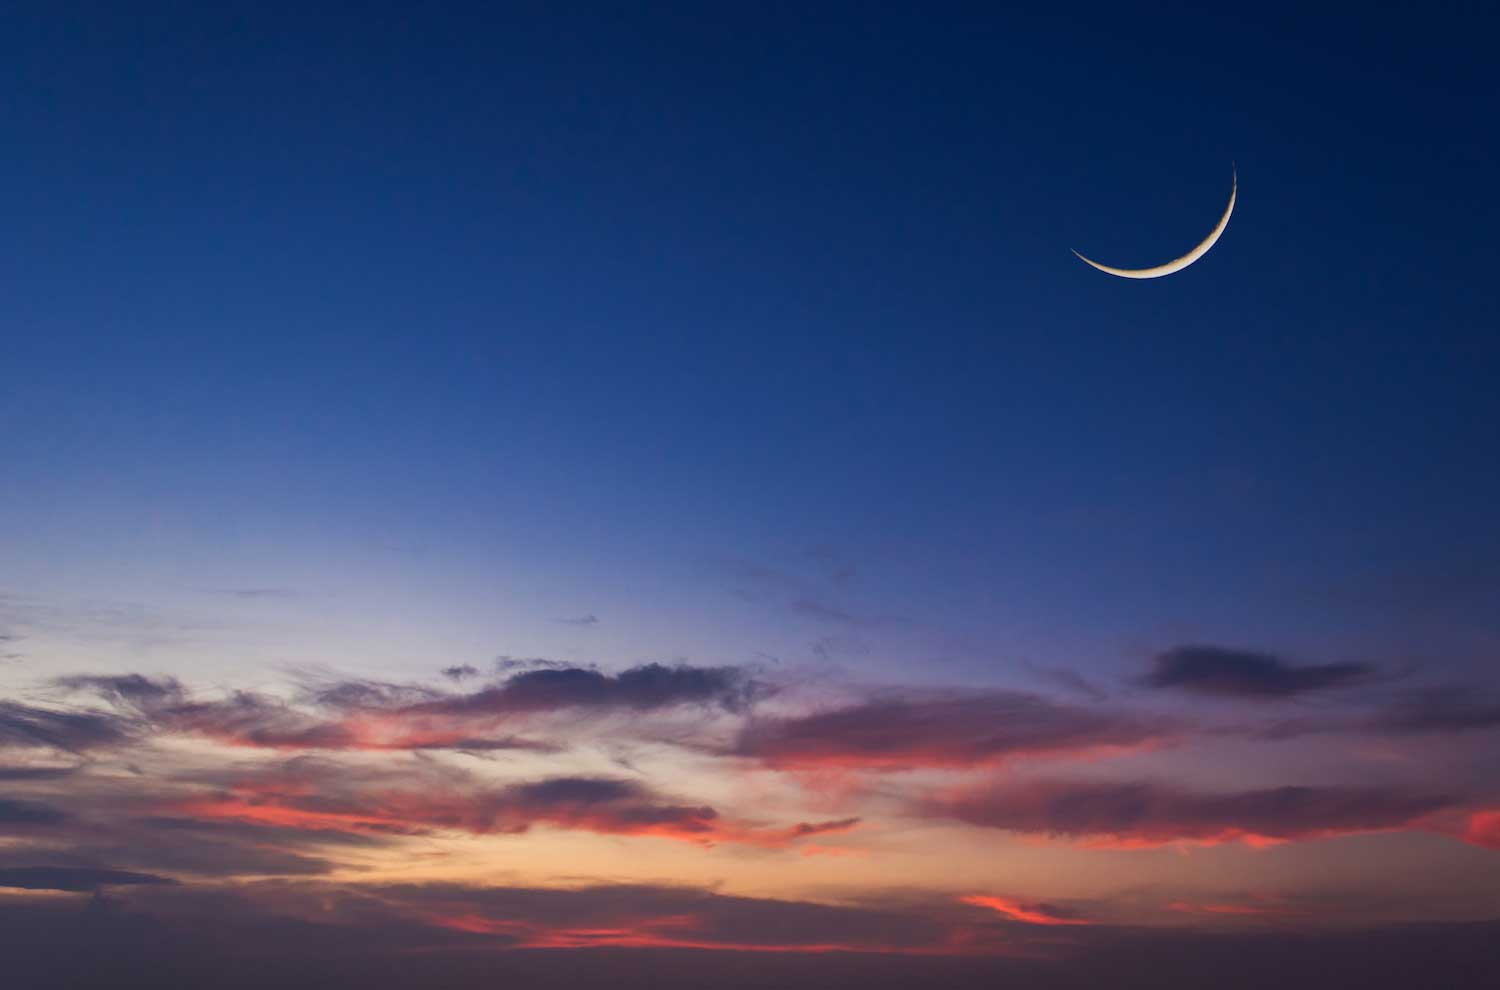 A new moon high in the sky above pinkish clouds just after the sun has set.